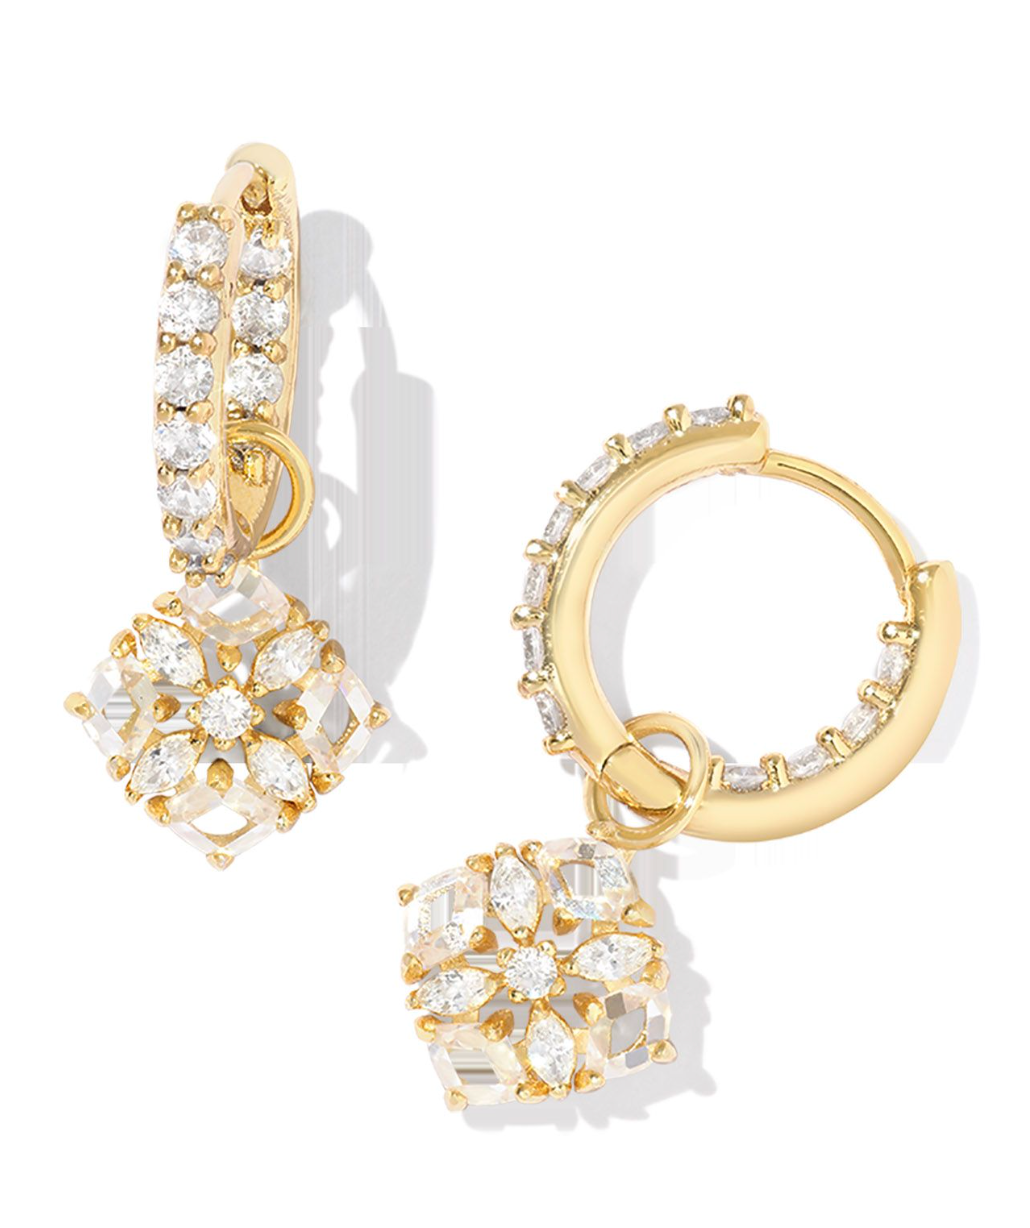 Dira Convertible Gold Huggie Earrings in White Crystal | KENDRA SCOTT - The Street Boutique 